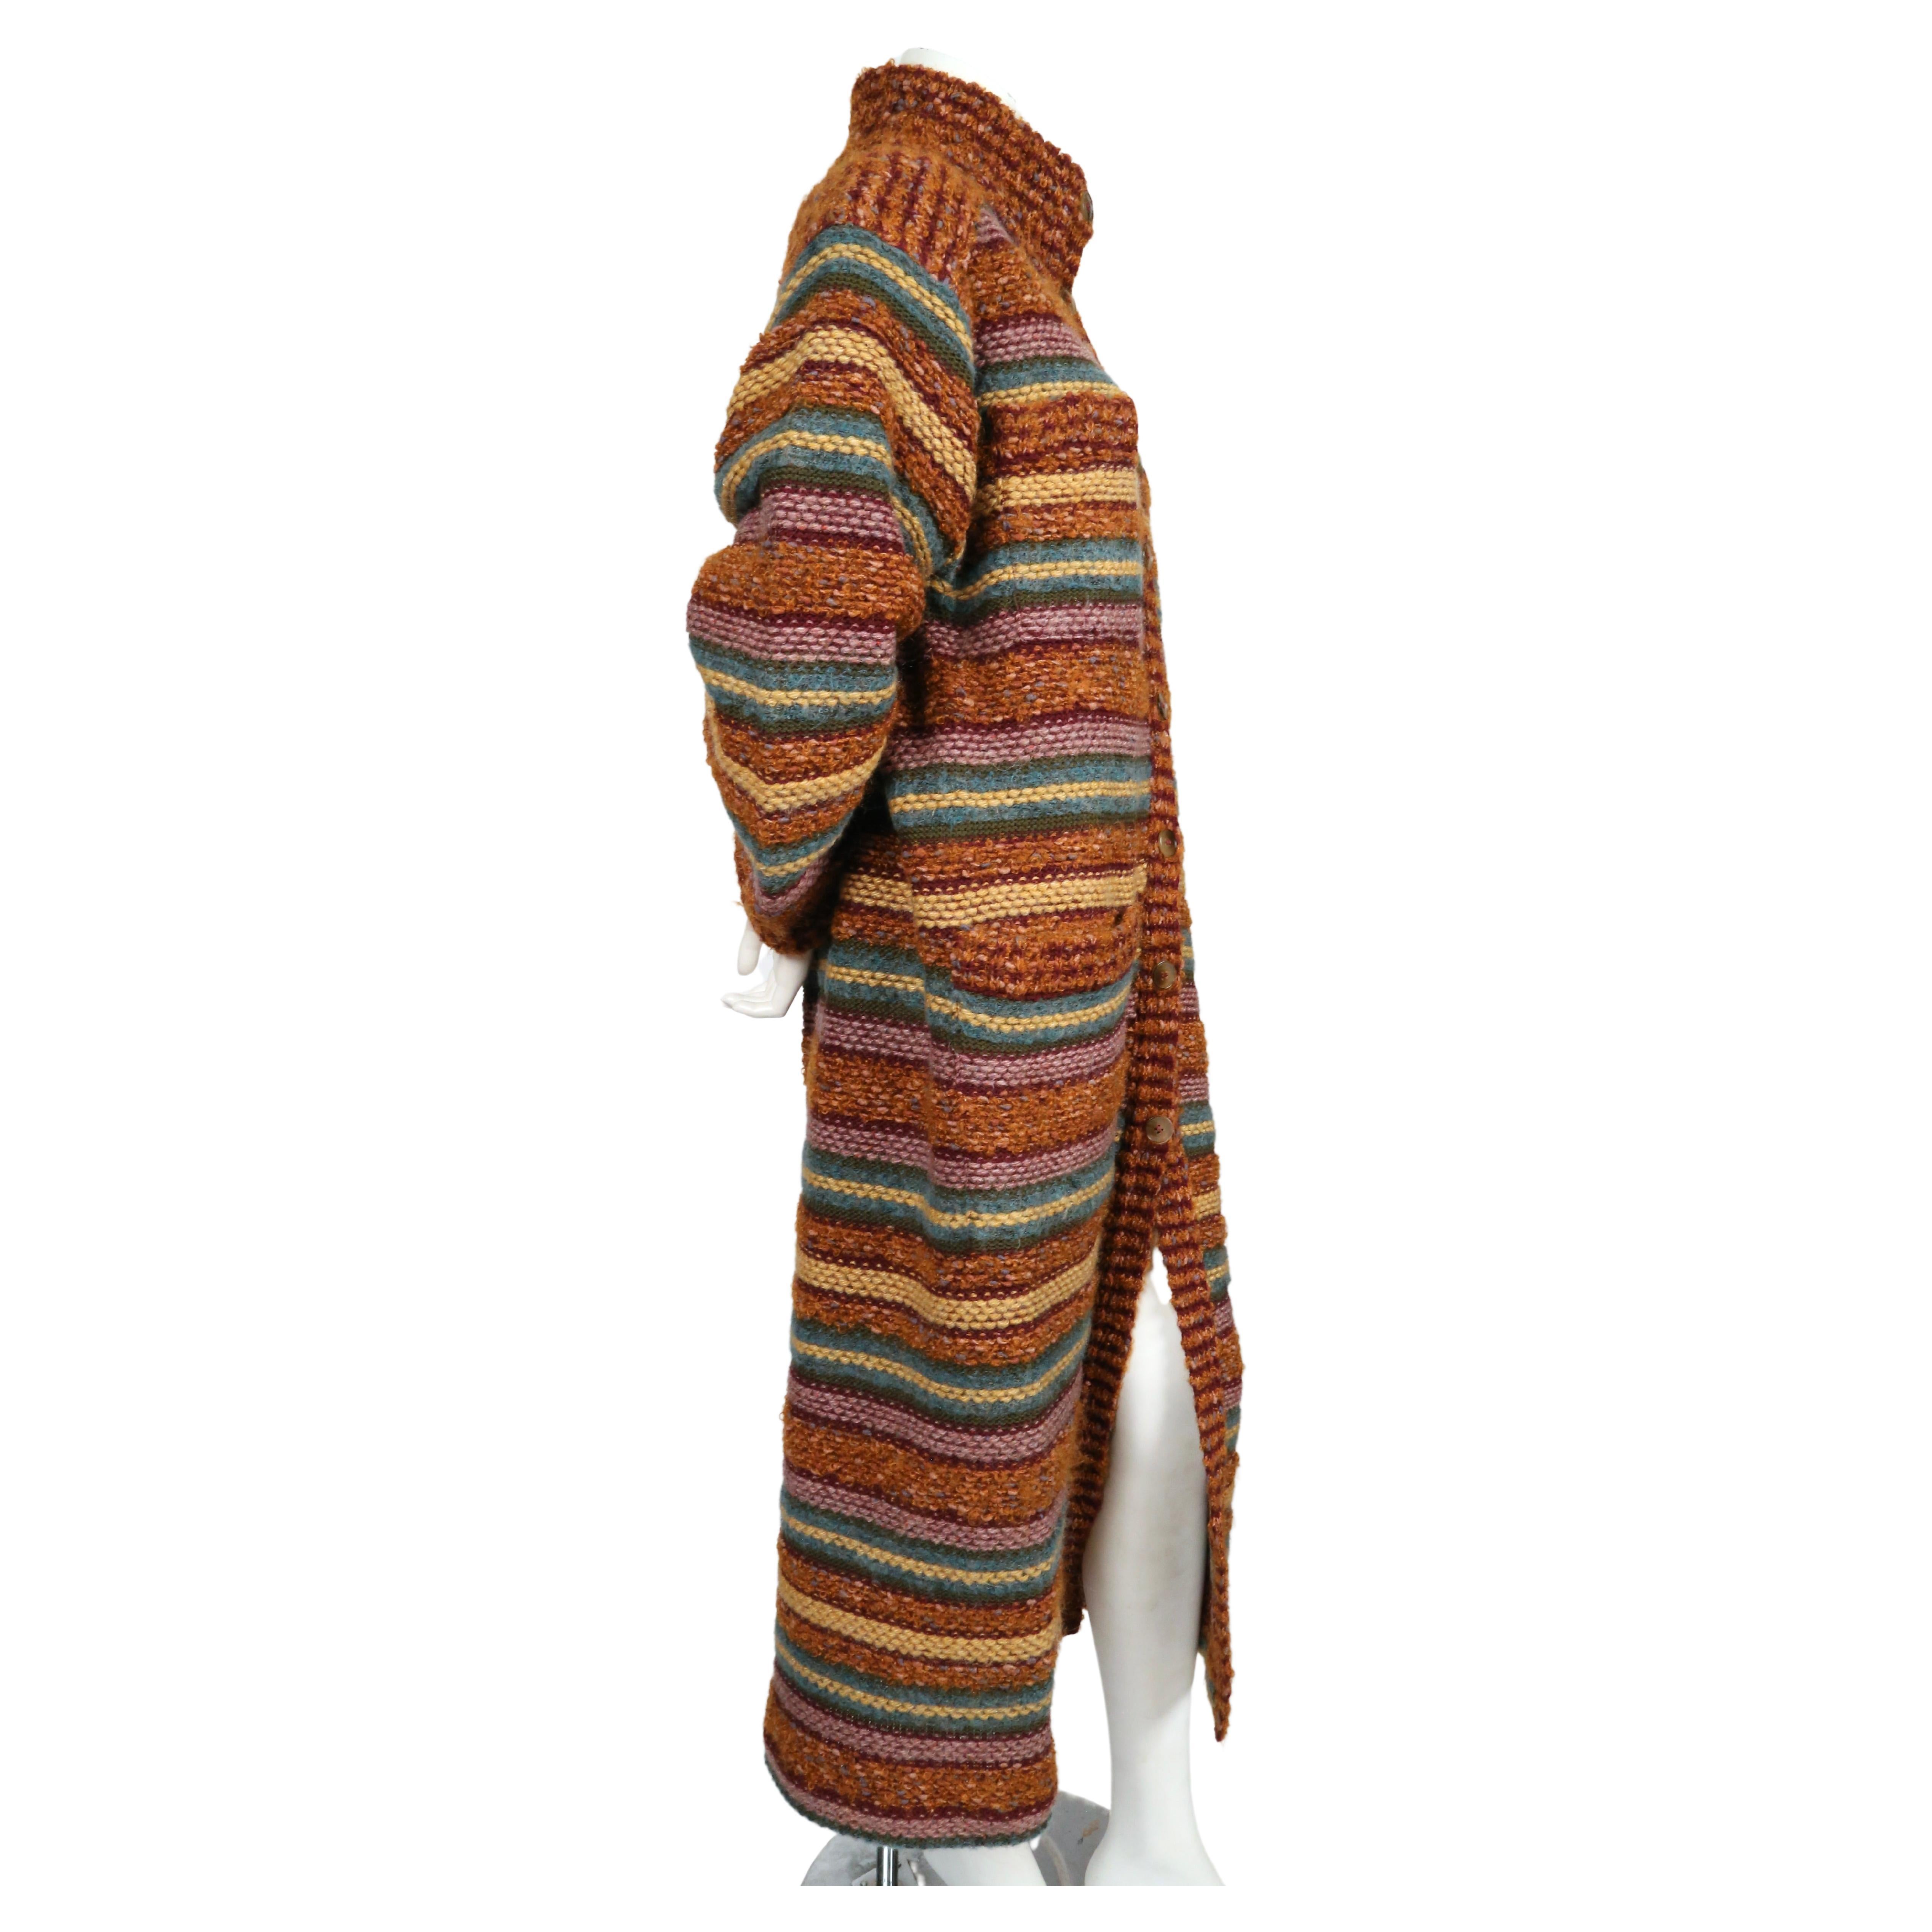 Long striped sweater coat from Missoni dating to the 1970's. Labeled a size M. Approximate measurements: shoulder 20